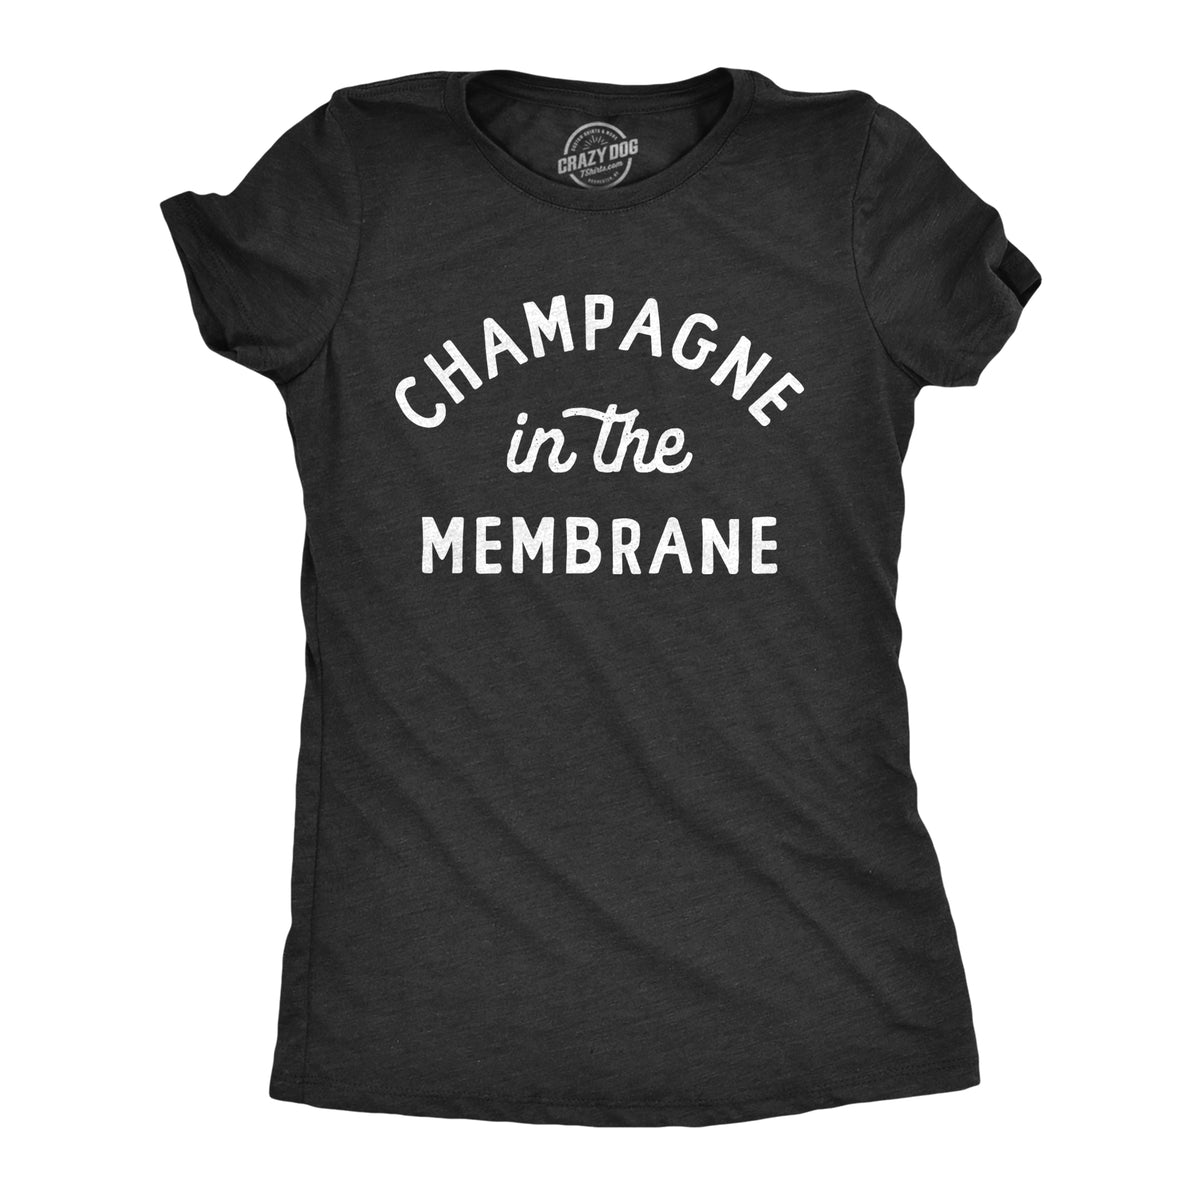 Funny Heather Black - CHAMPAGNE Champagne In The Membrane Womens T Shirt Nerdy New Years Drinking Tee